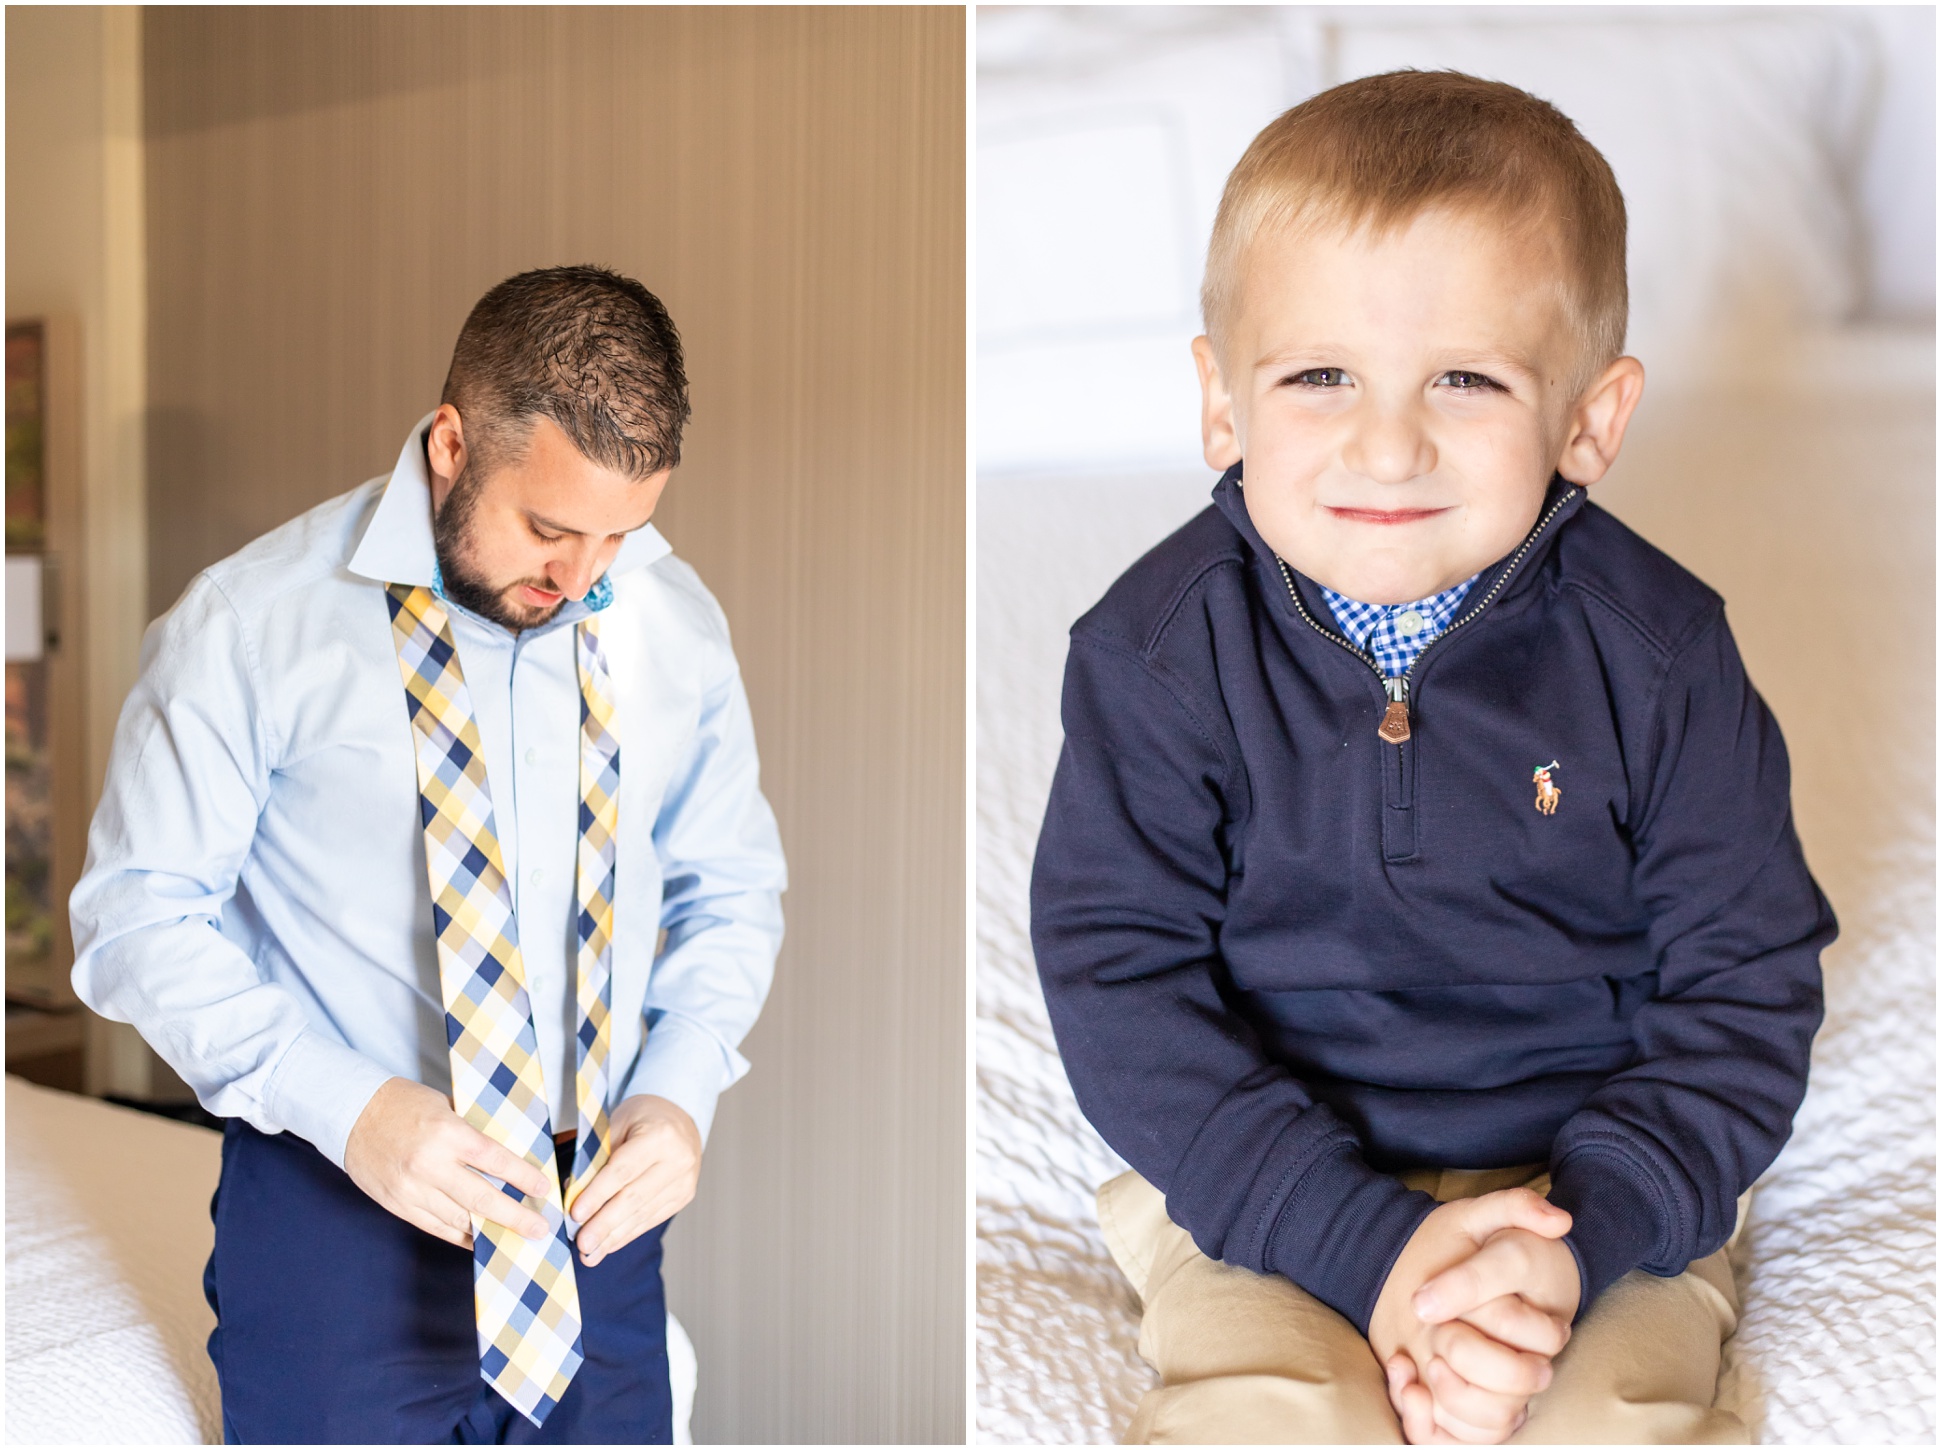 Left Image: Groom putting on tie, Right Image: Son waiting patiently